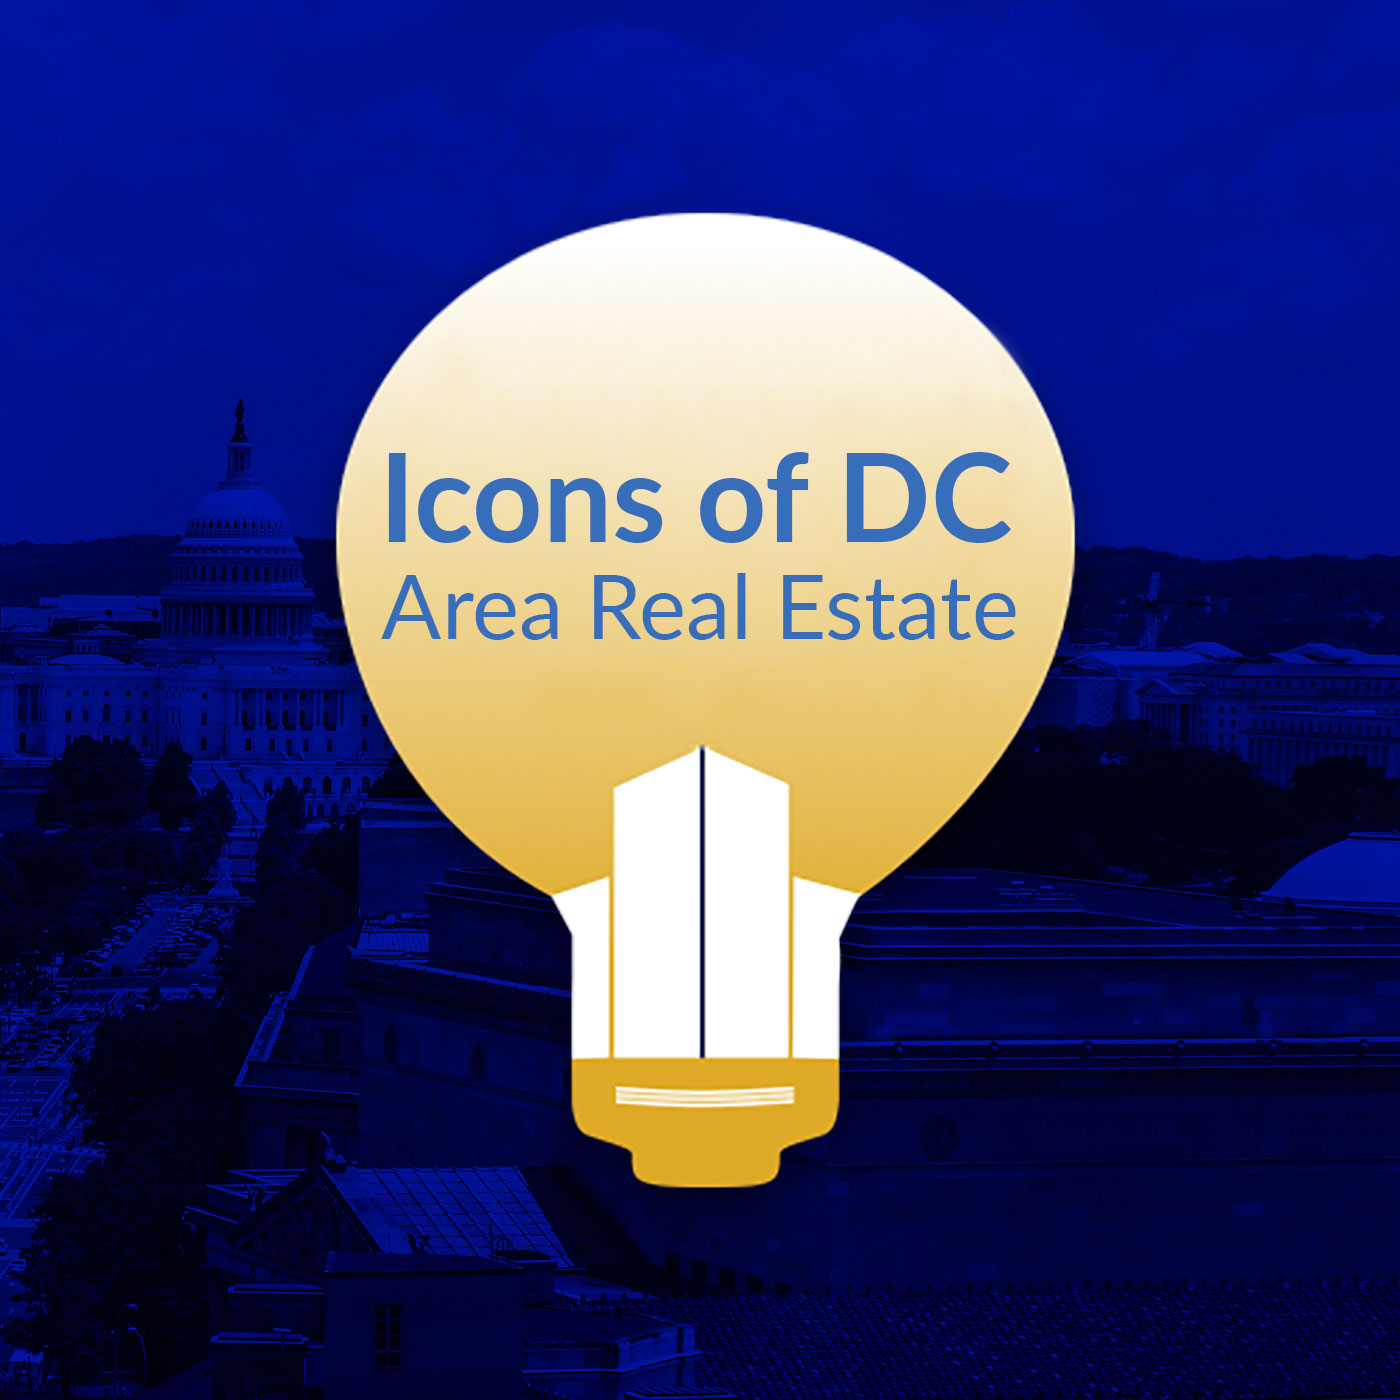 Icons of DC Area Real Estate